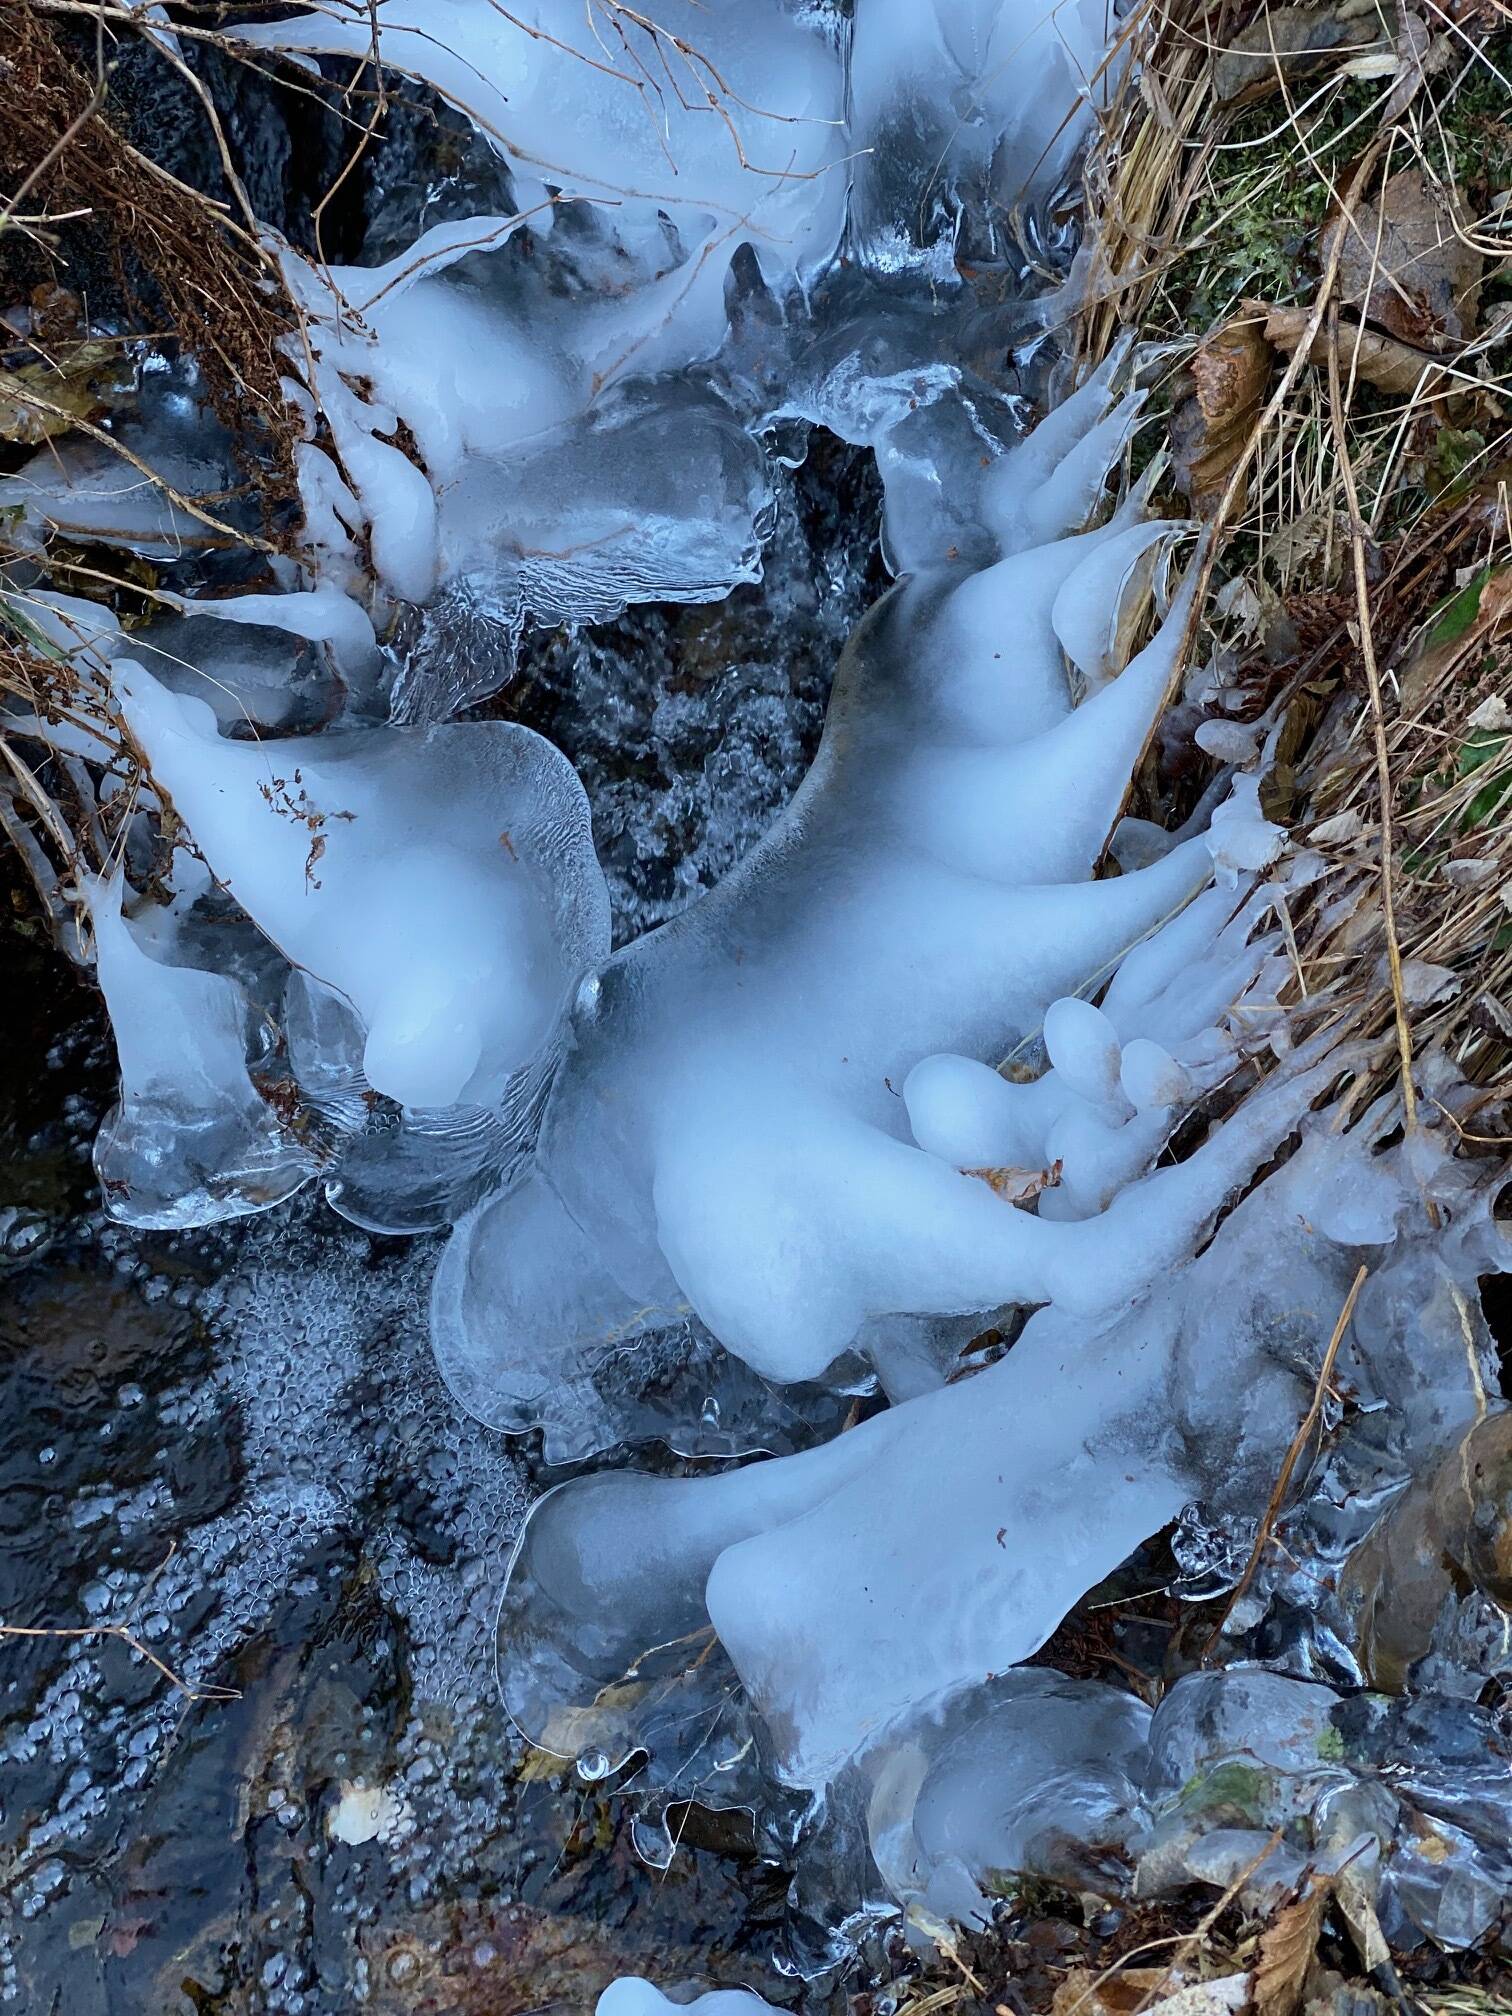 Icy formations in Granite Creek Basin resemble ghost-like creatures attempting to climb up and out on Oct. 25. (Photo by Denise Carroll)